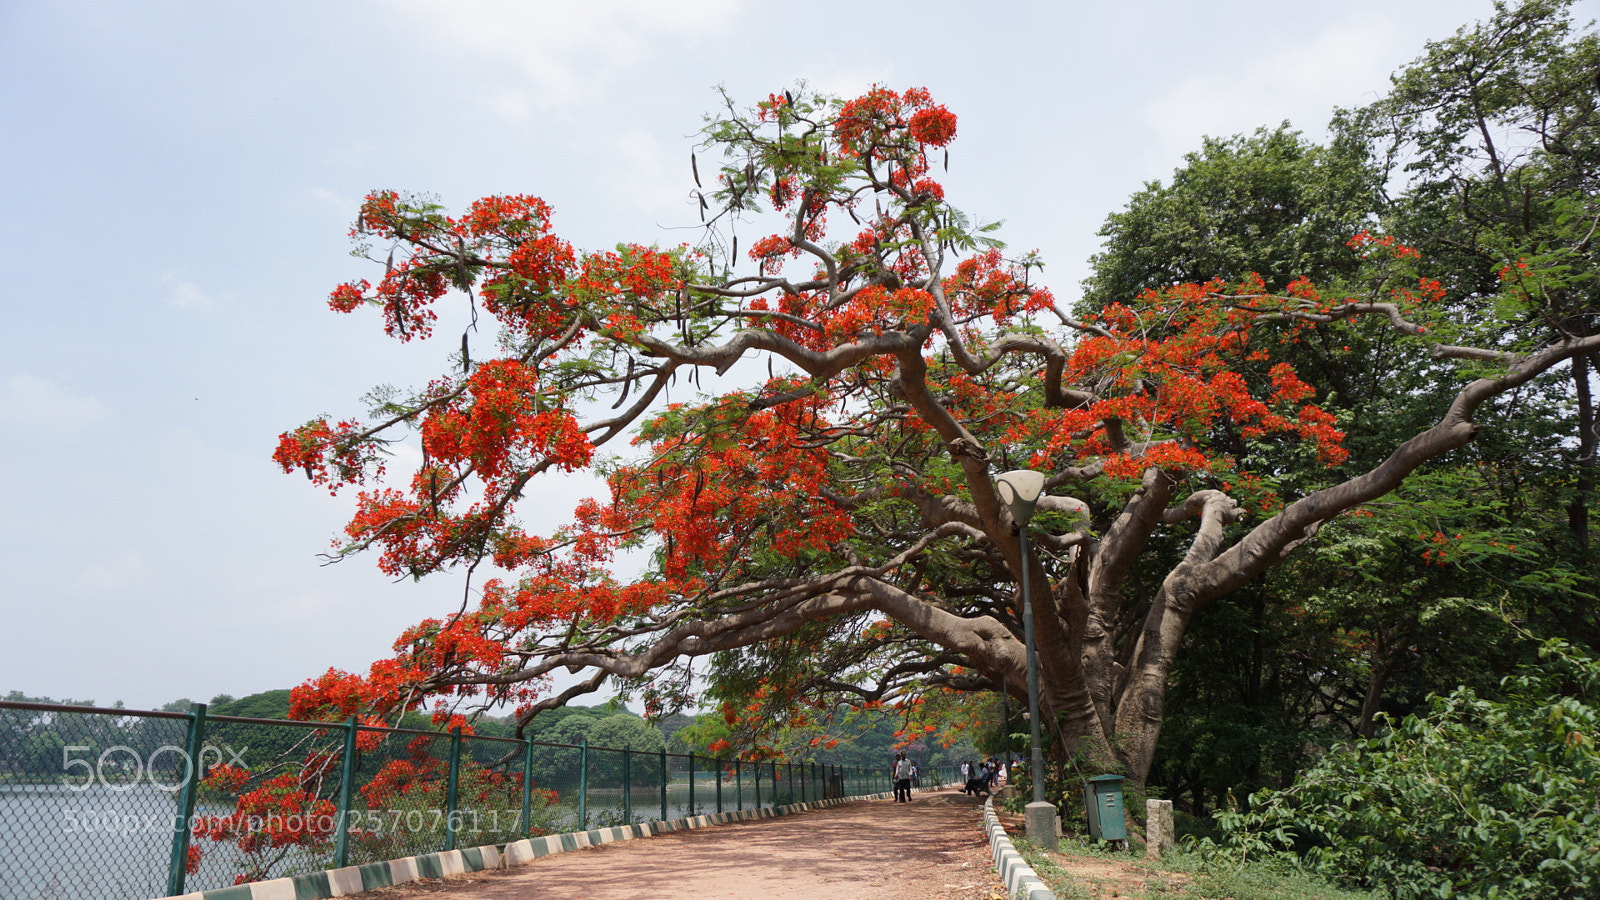 Sony a6000 sample photo. May tree in bangalore photography